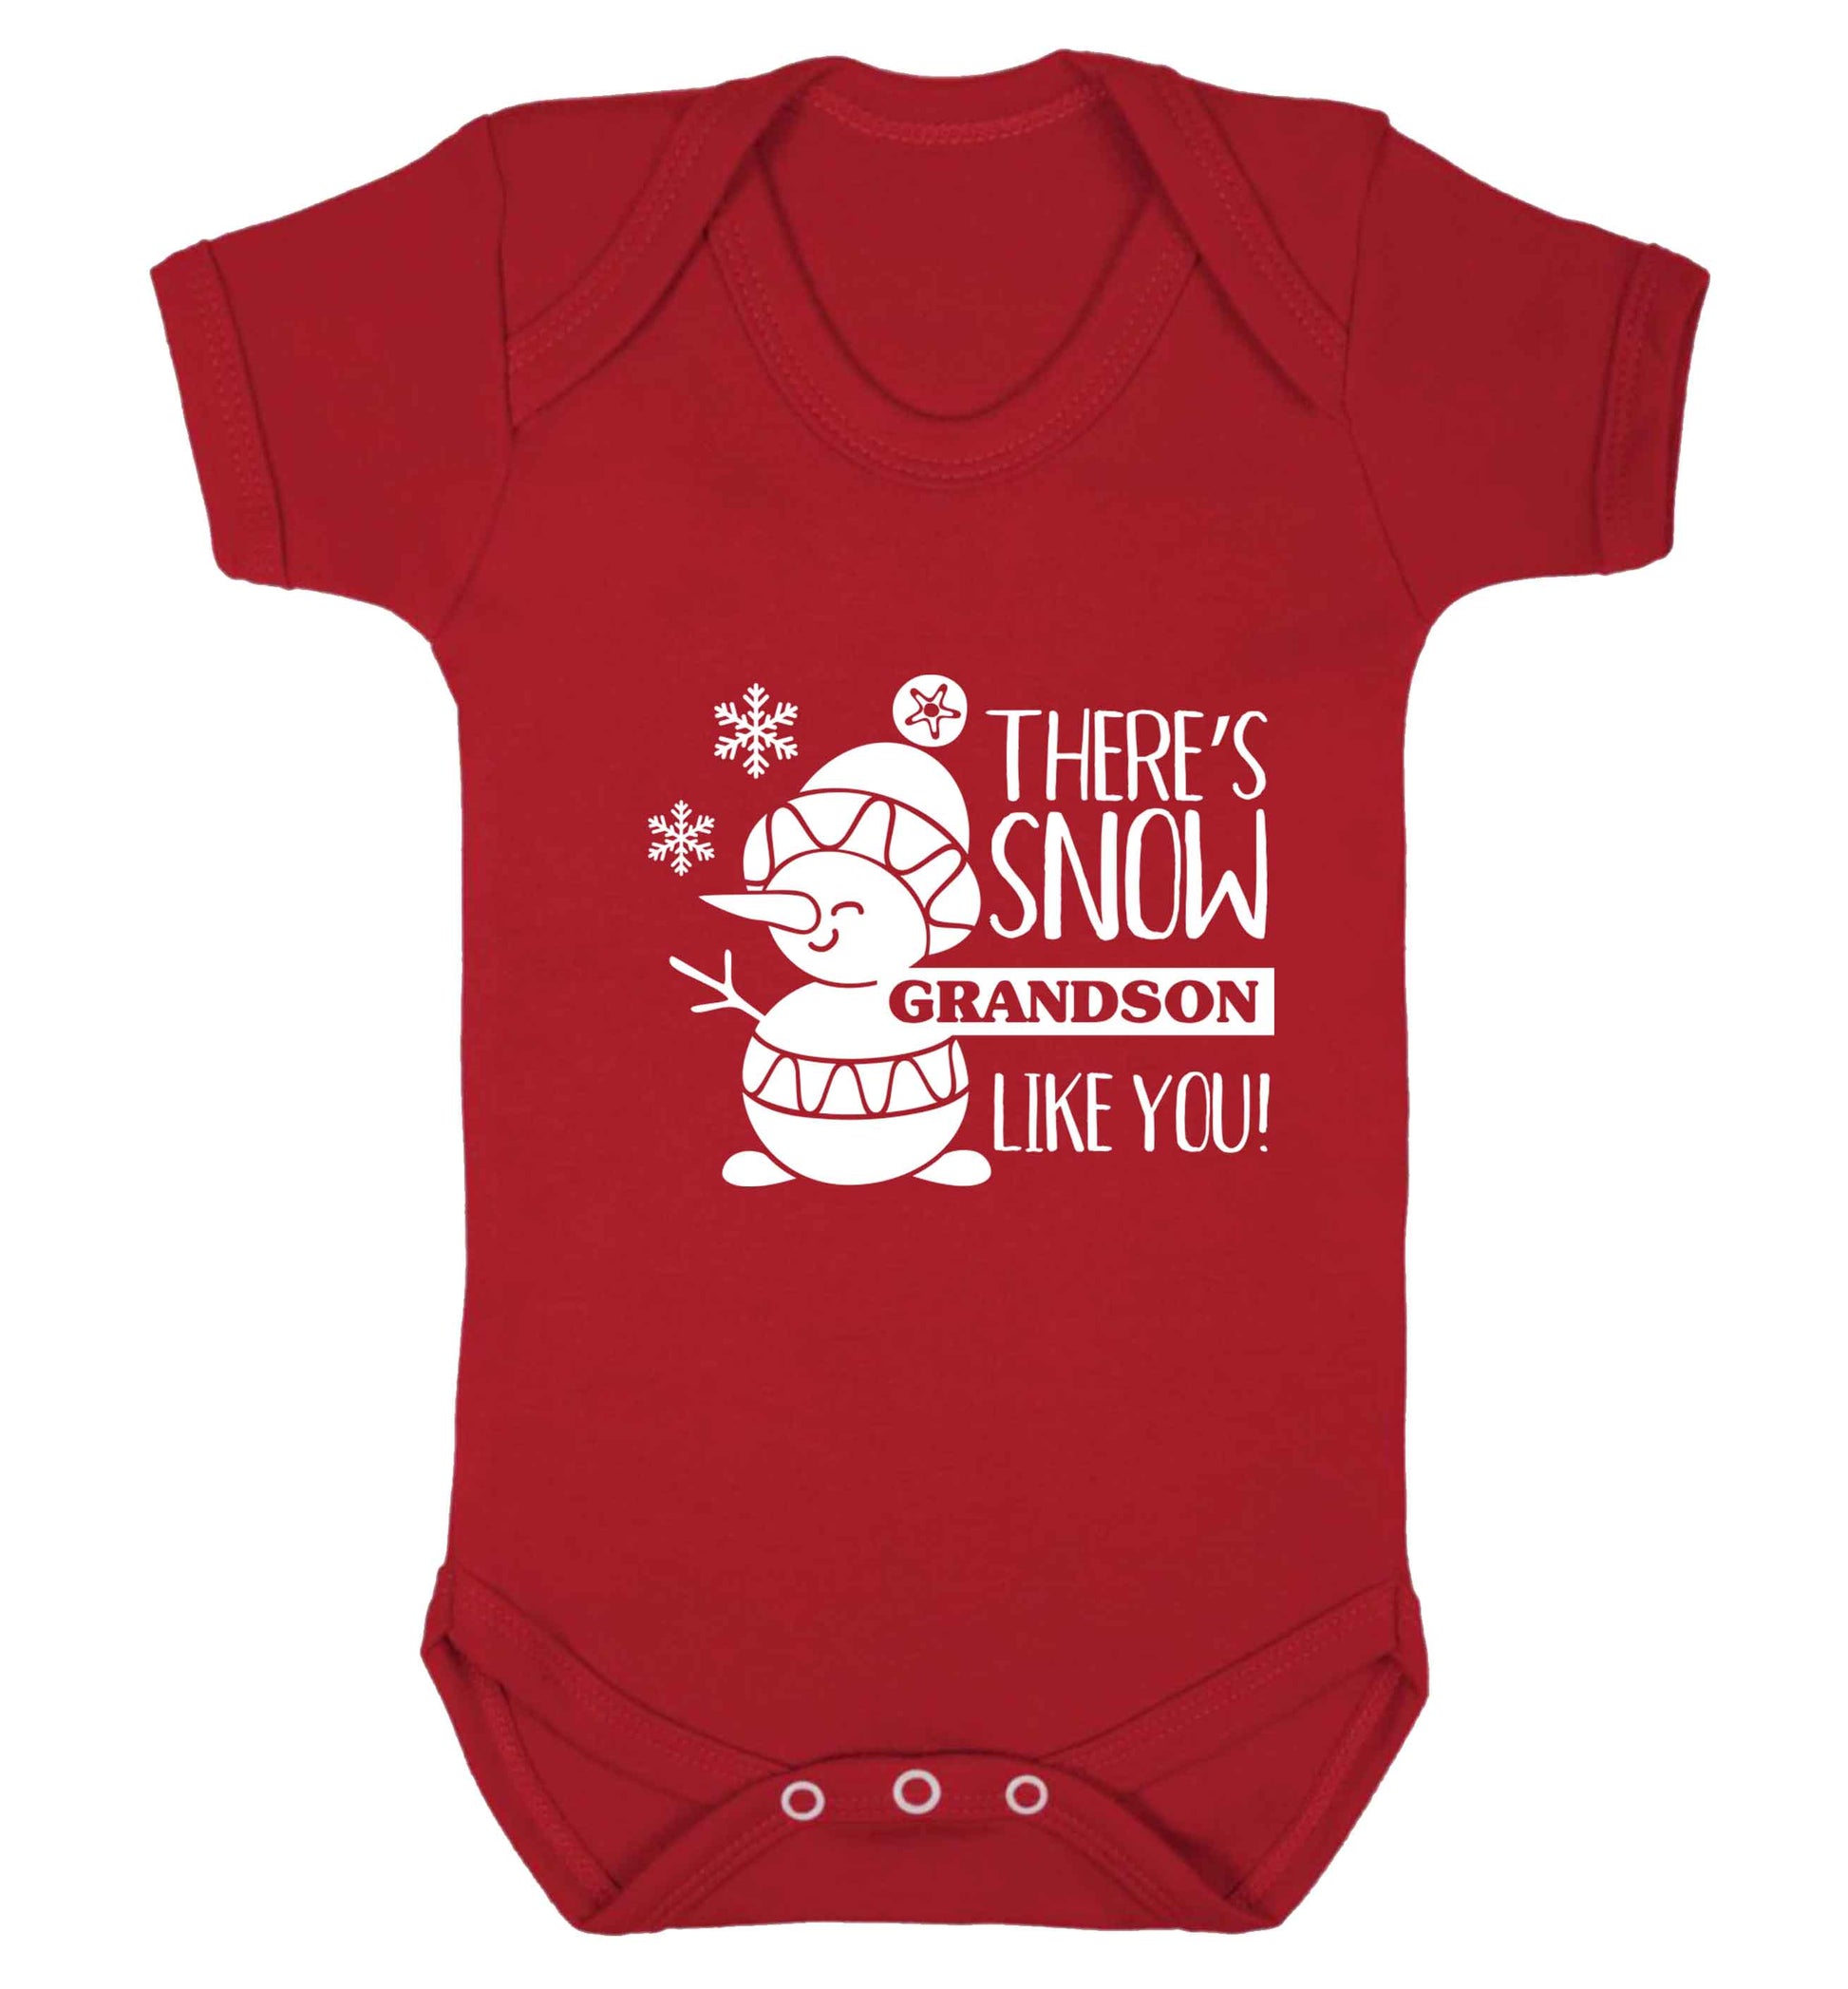 There's snow grandson like you baby vest red 18-24 months